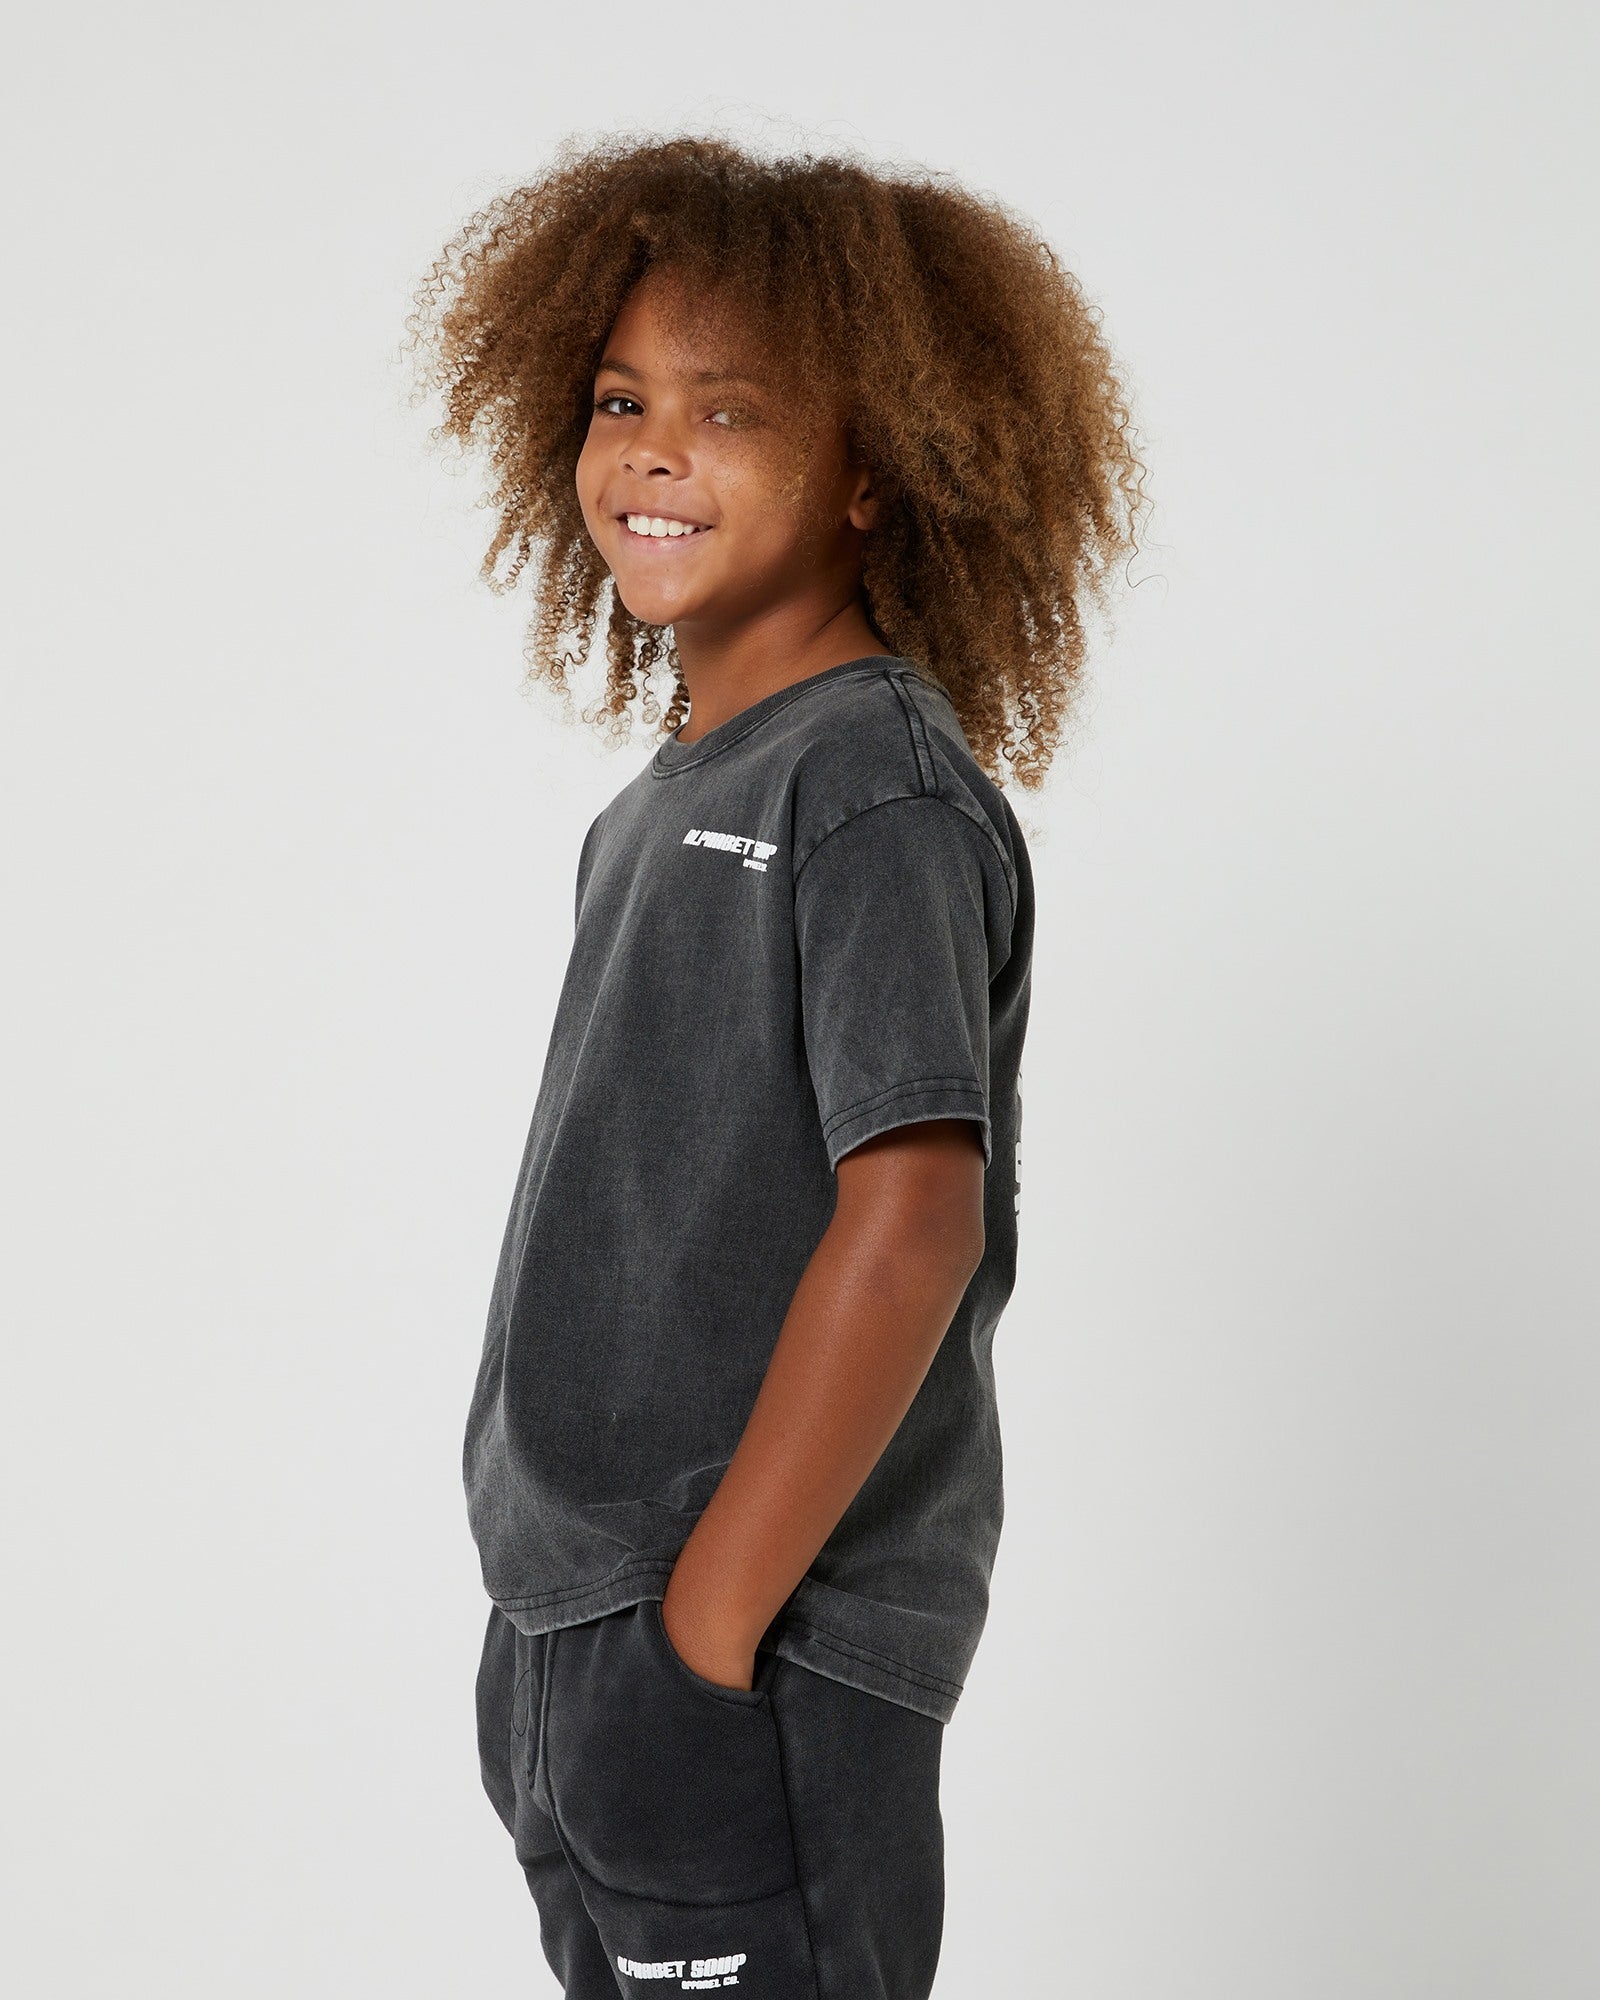 Teen Boys San Clemente Tee from Alphabet Soup. 100% cotton with vintage dye wash. Puff logo print. Straight hemline, short sleeves. Comfortable and casual.